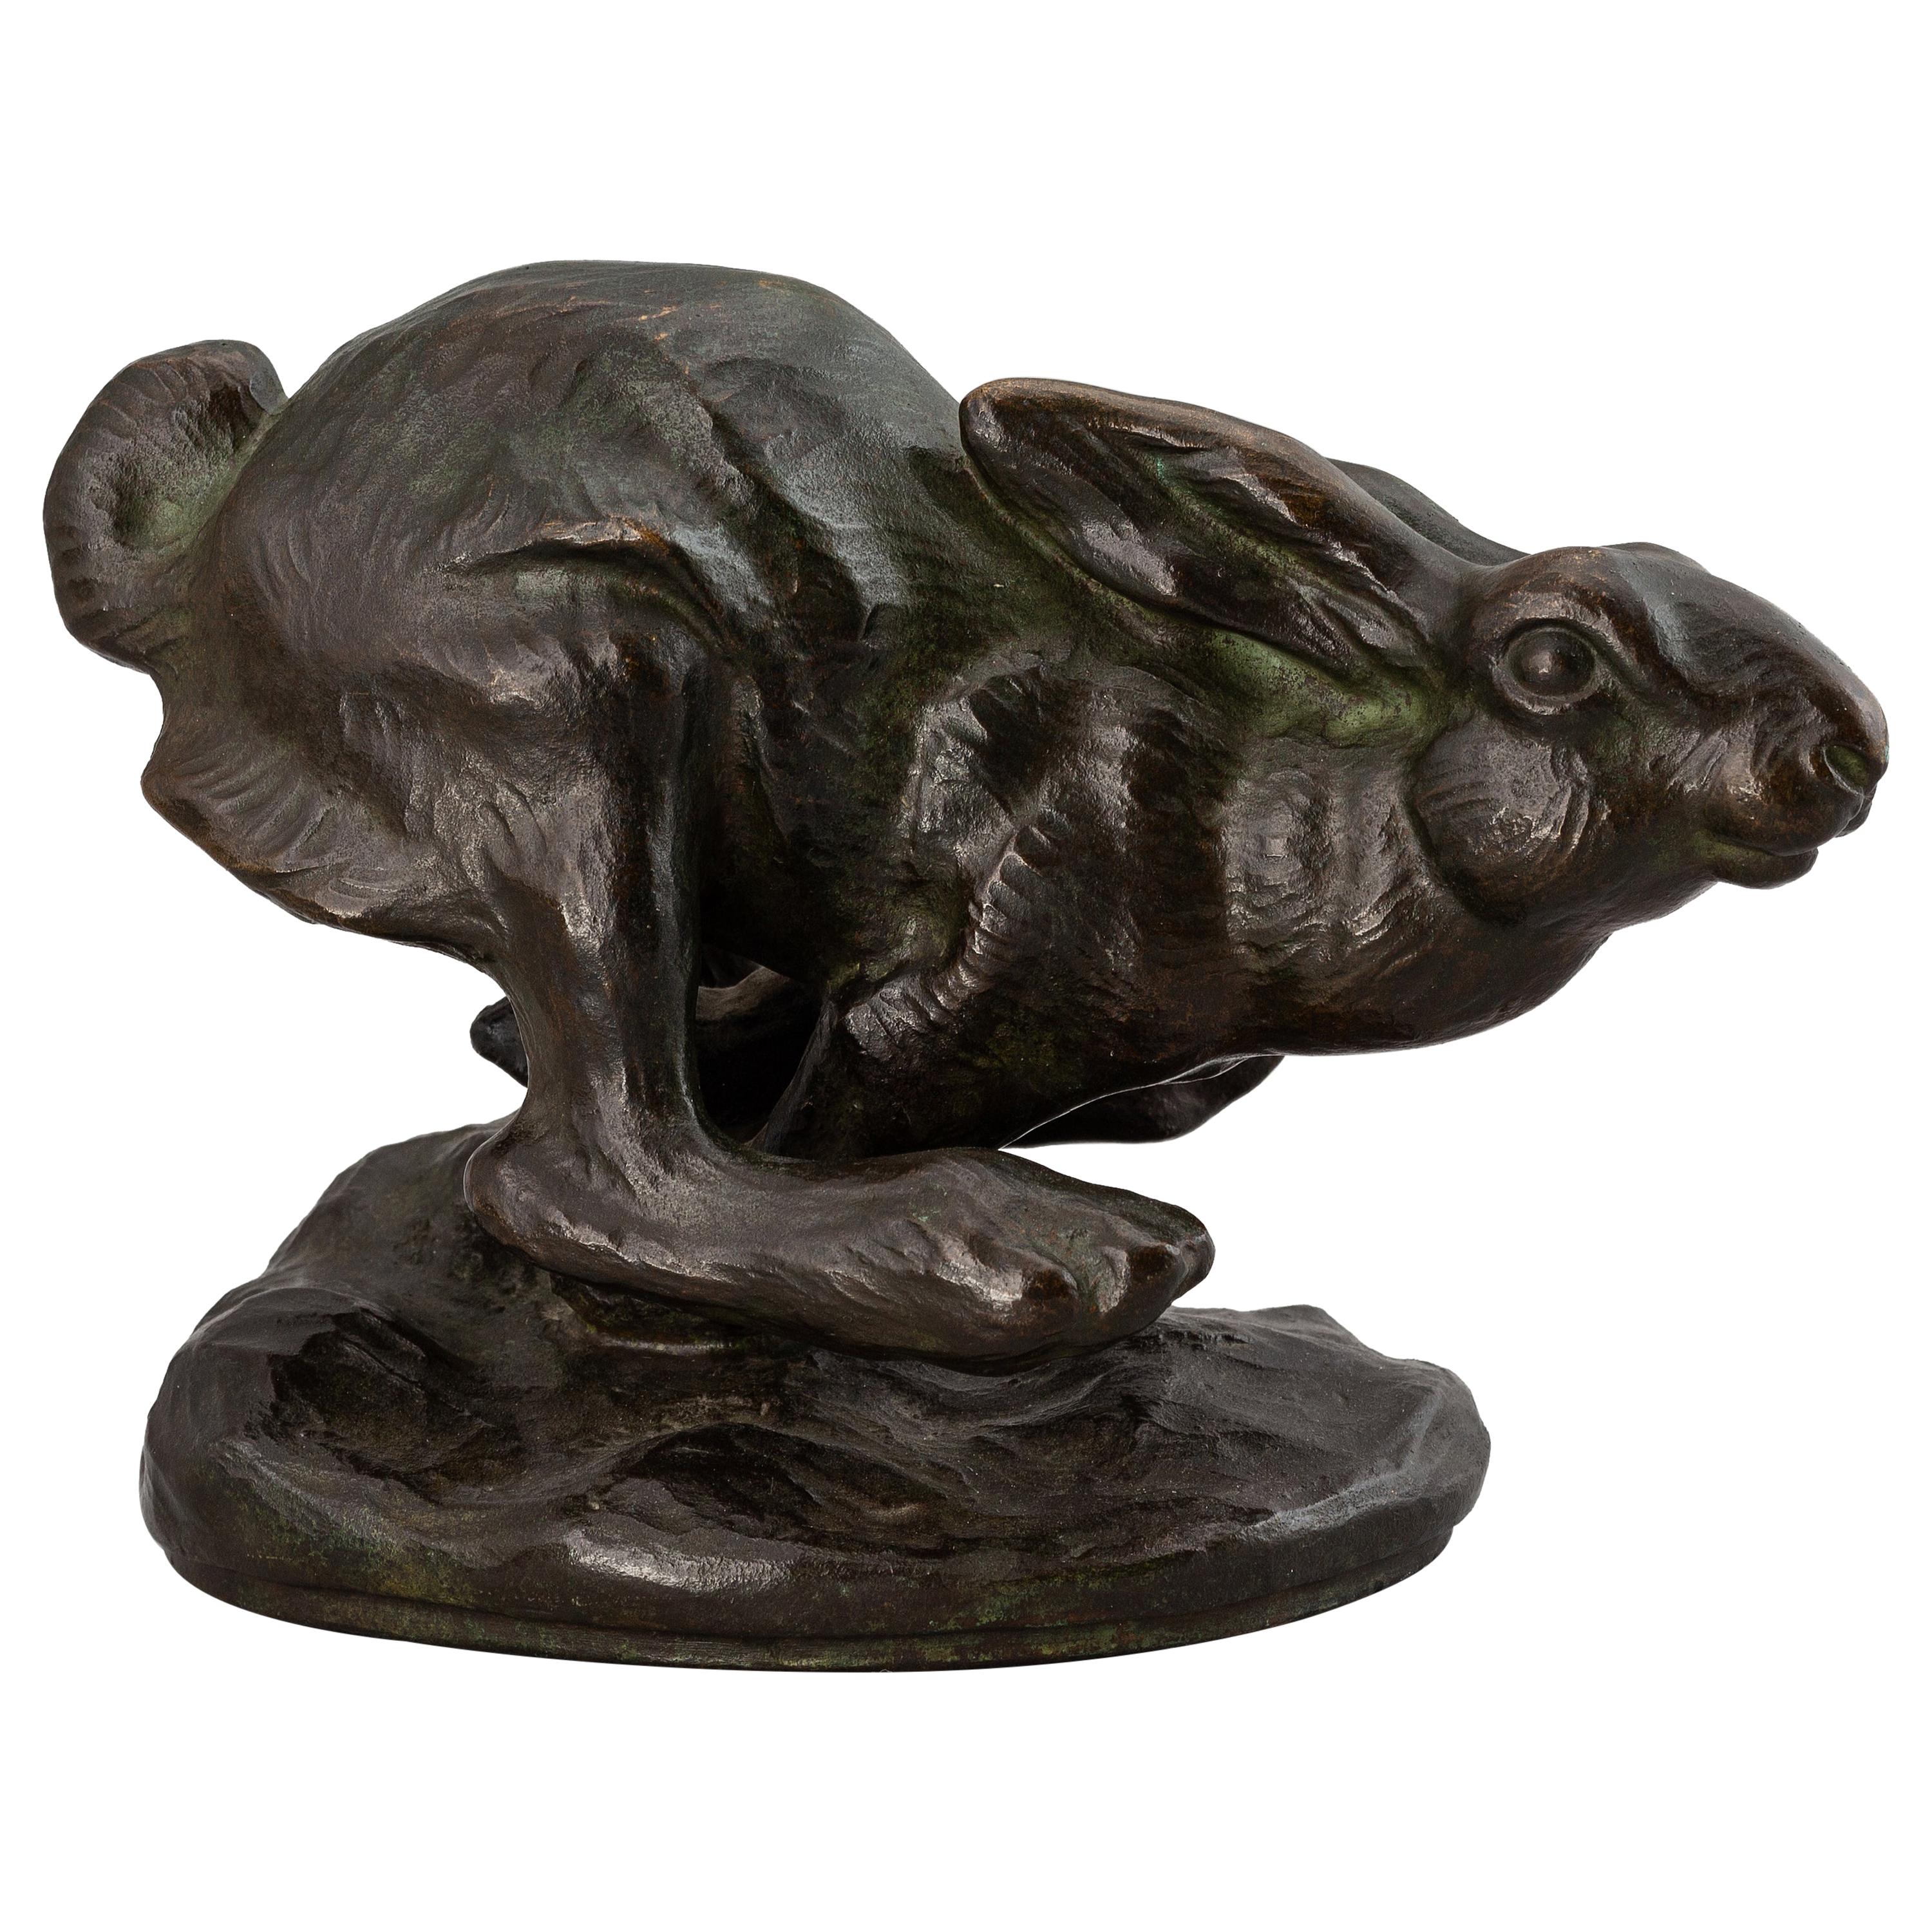 Sculpture of a Hare by Knud Max Möller